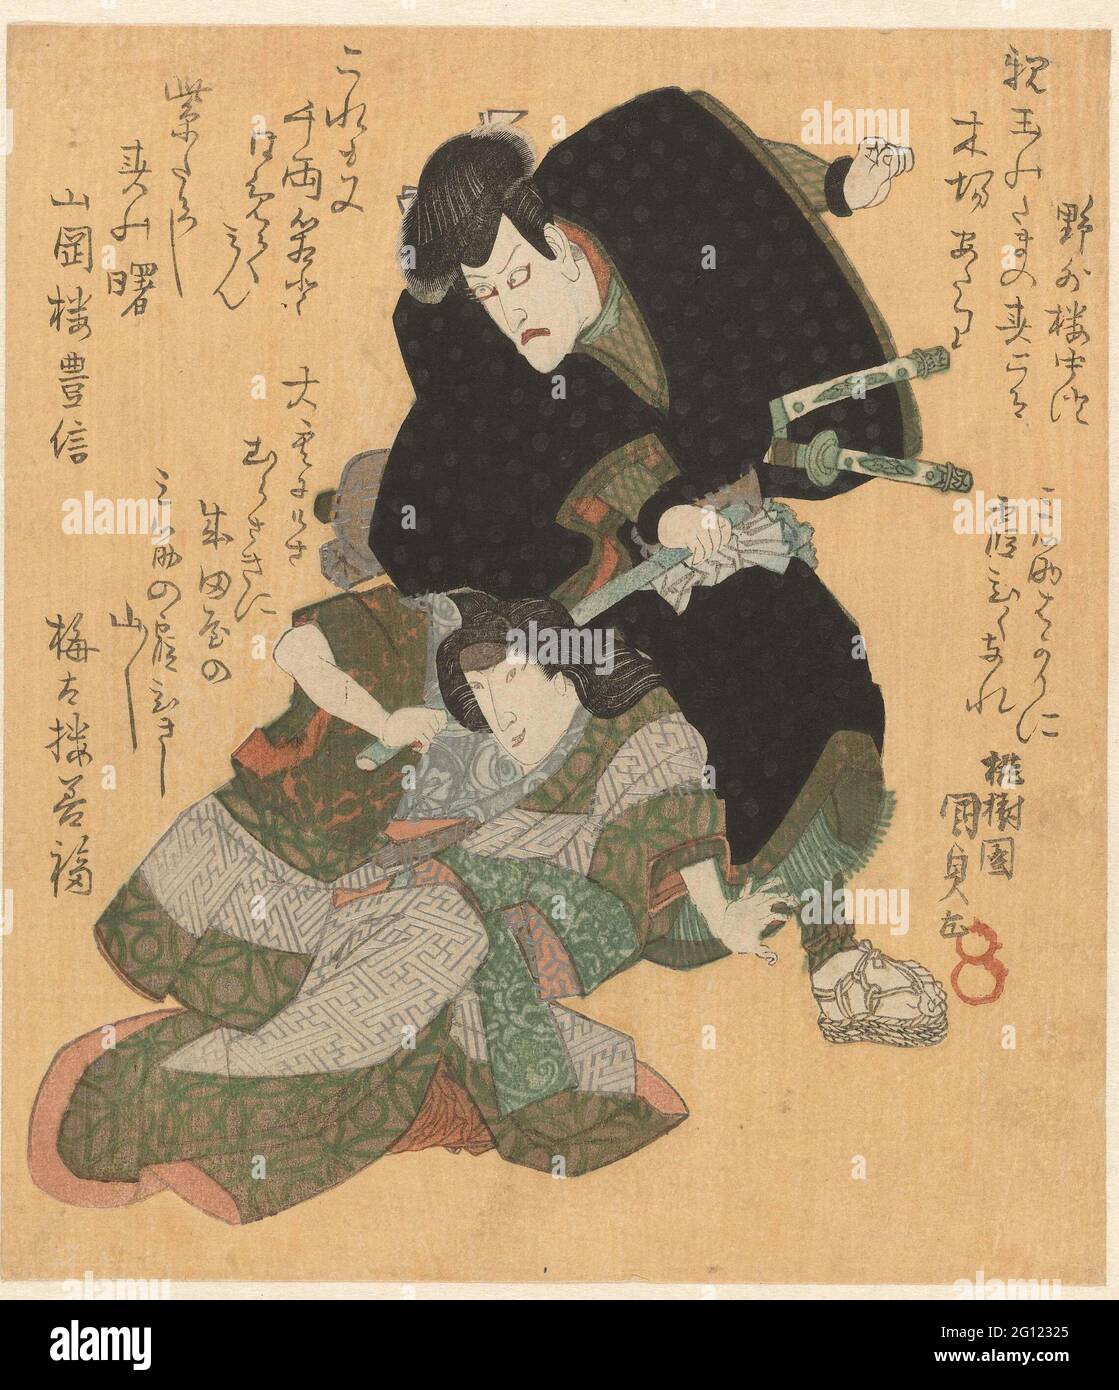 Fighting man and woman. A man in black clothes grabs the stick with which a woman hit him. The man is Ishikawa Goemon, played by actor Ichikaiwa Danjûrô VII (1791-1859). The woman, actor Iwai Shijaku (1804-1845), plays the role of a Courtisan called Segawa, who is actually called Oritsu and Ishikawa Goemon's wife. This scene comes from the play Masago No Gohiiki, raised in the Kawarazaki Theater in 1830. With three poems. Stock Photo